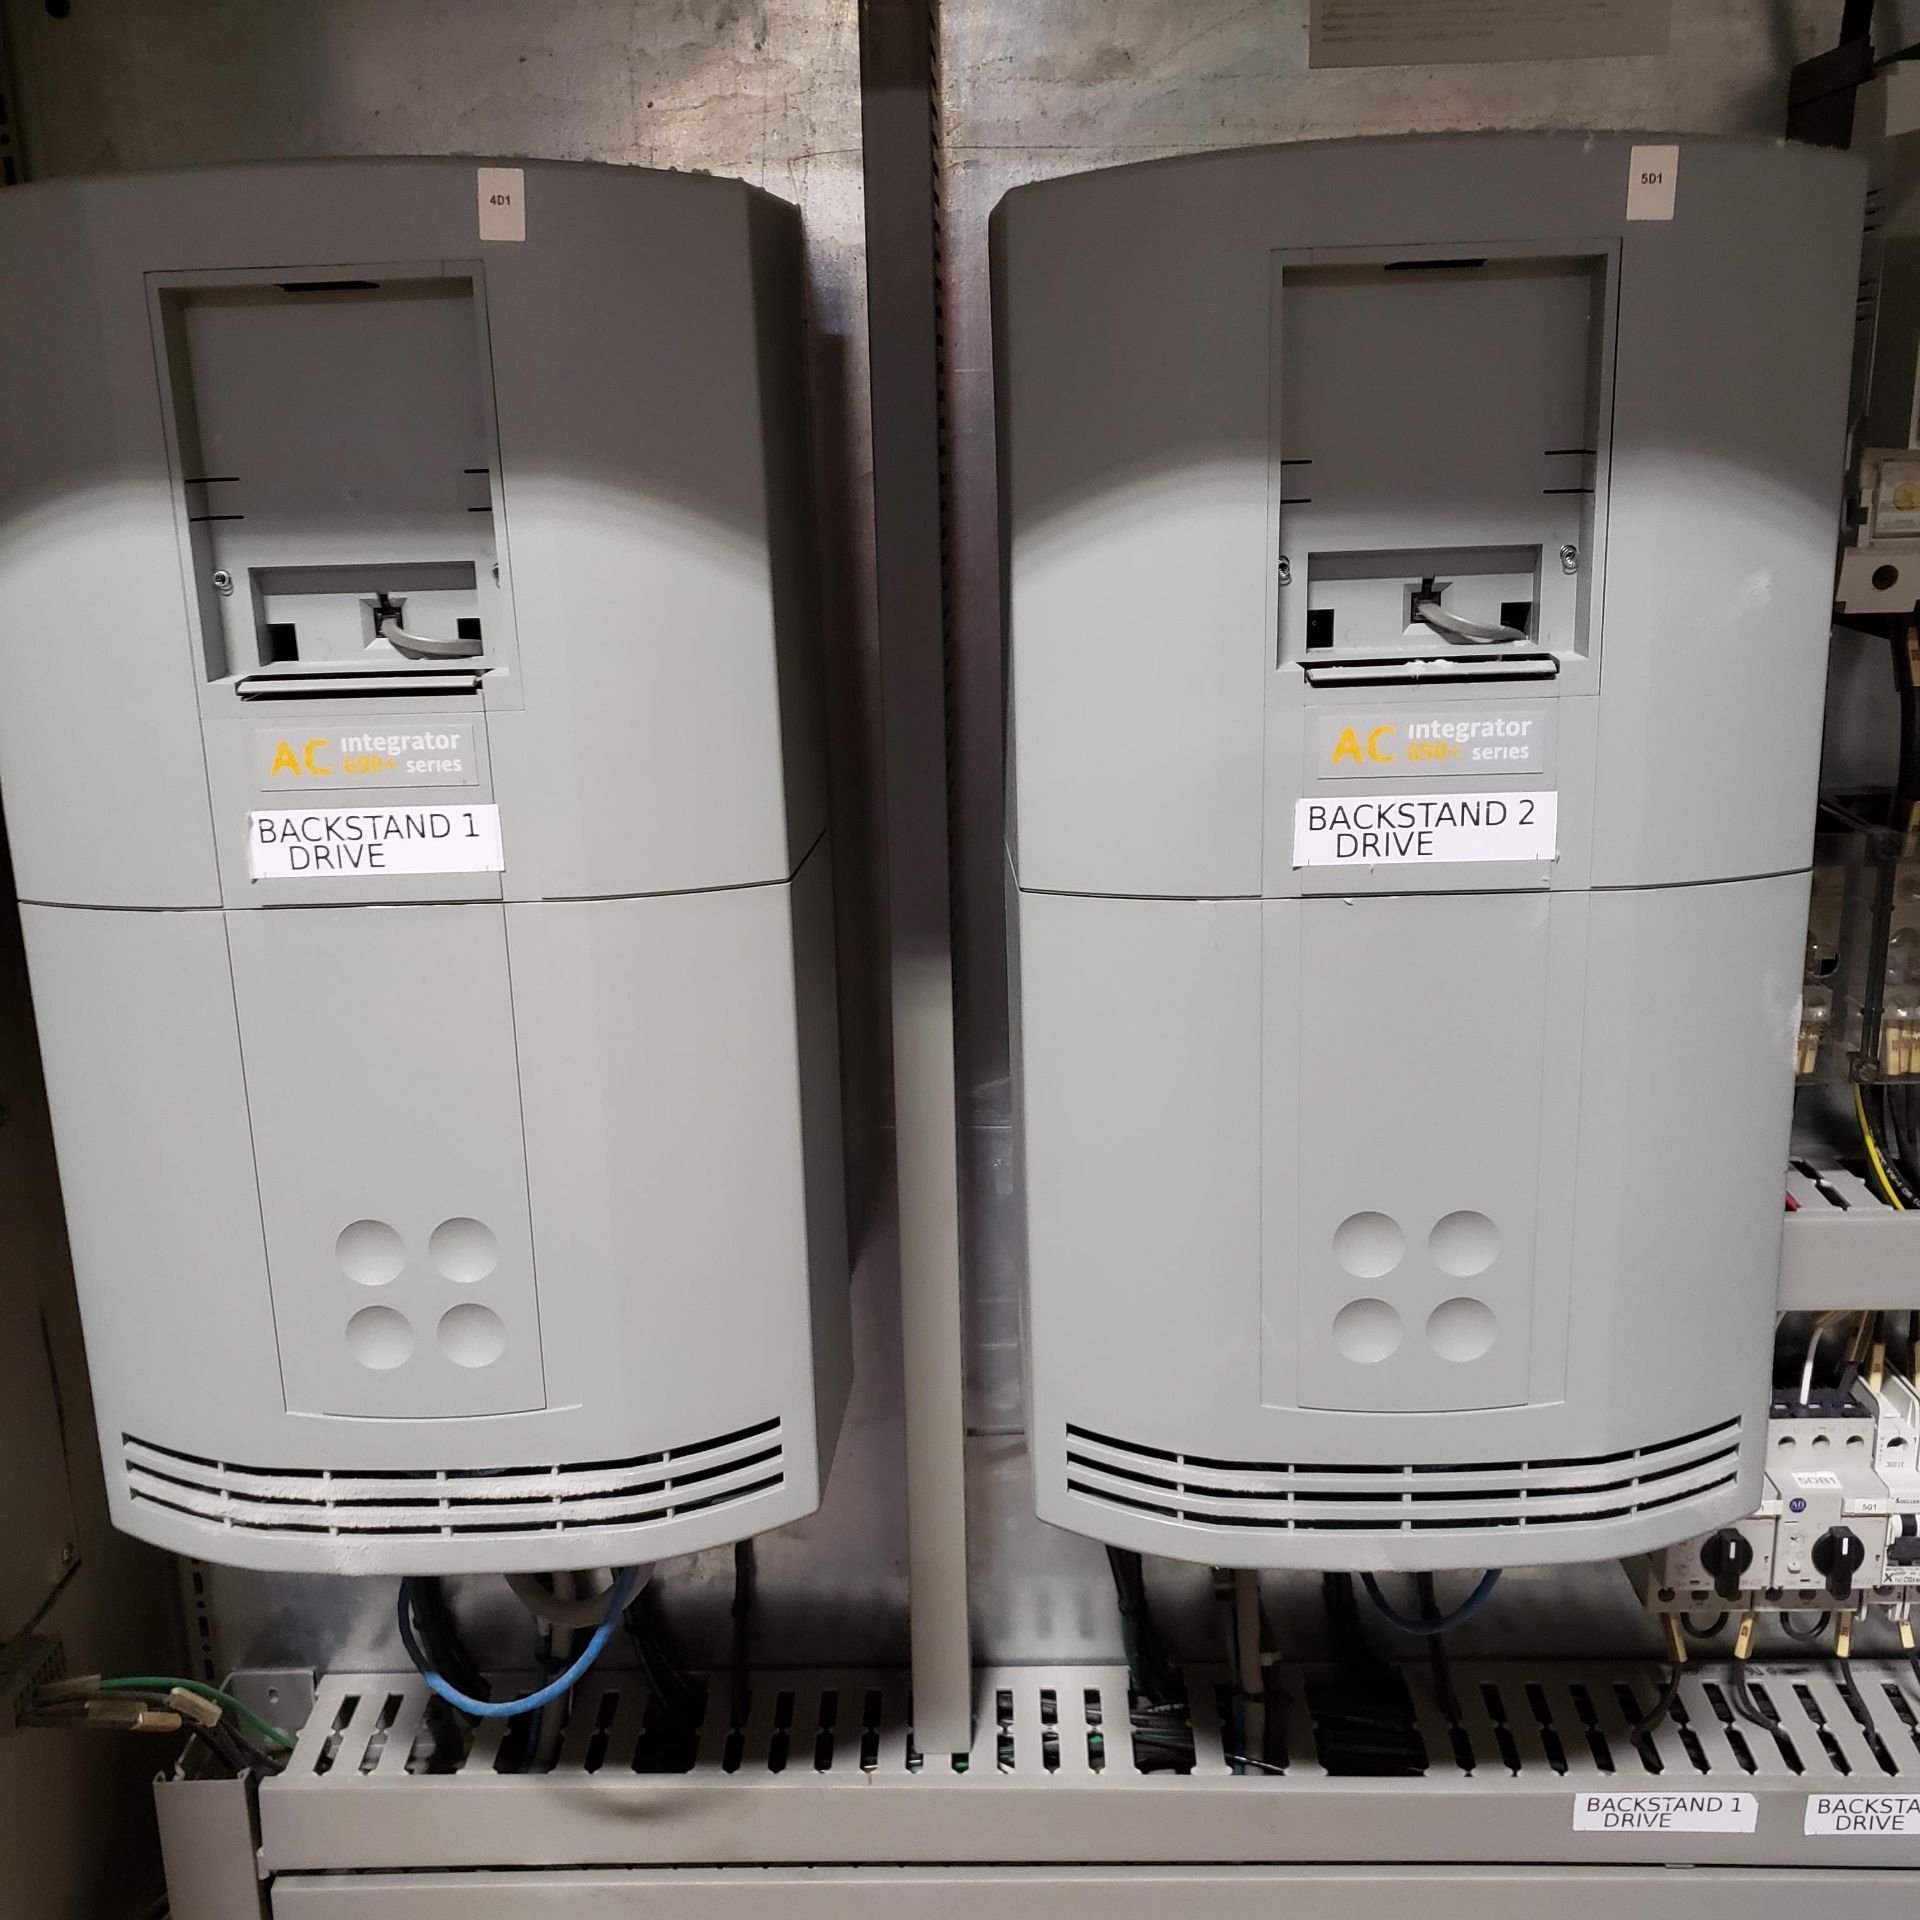 BACKSTANDS DRIVE CABINET, AND MAIN ELECTRICAL CABINET,WITH PLC AND DRIVES (B2 BACKSTAND) - Image 5 of 10